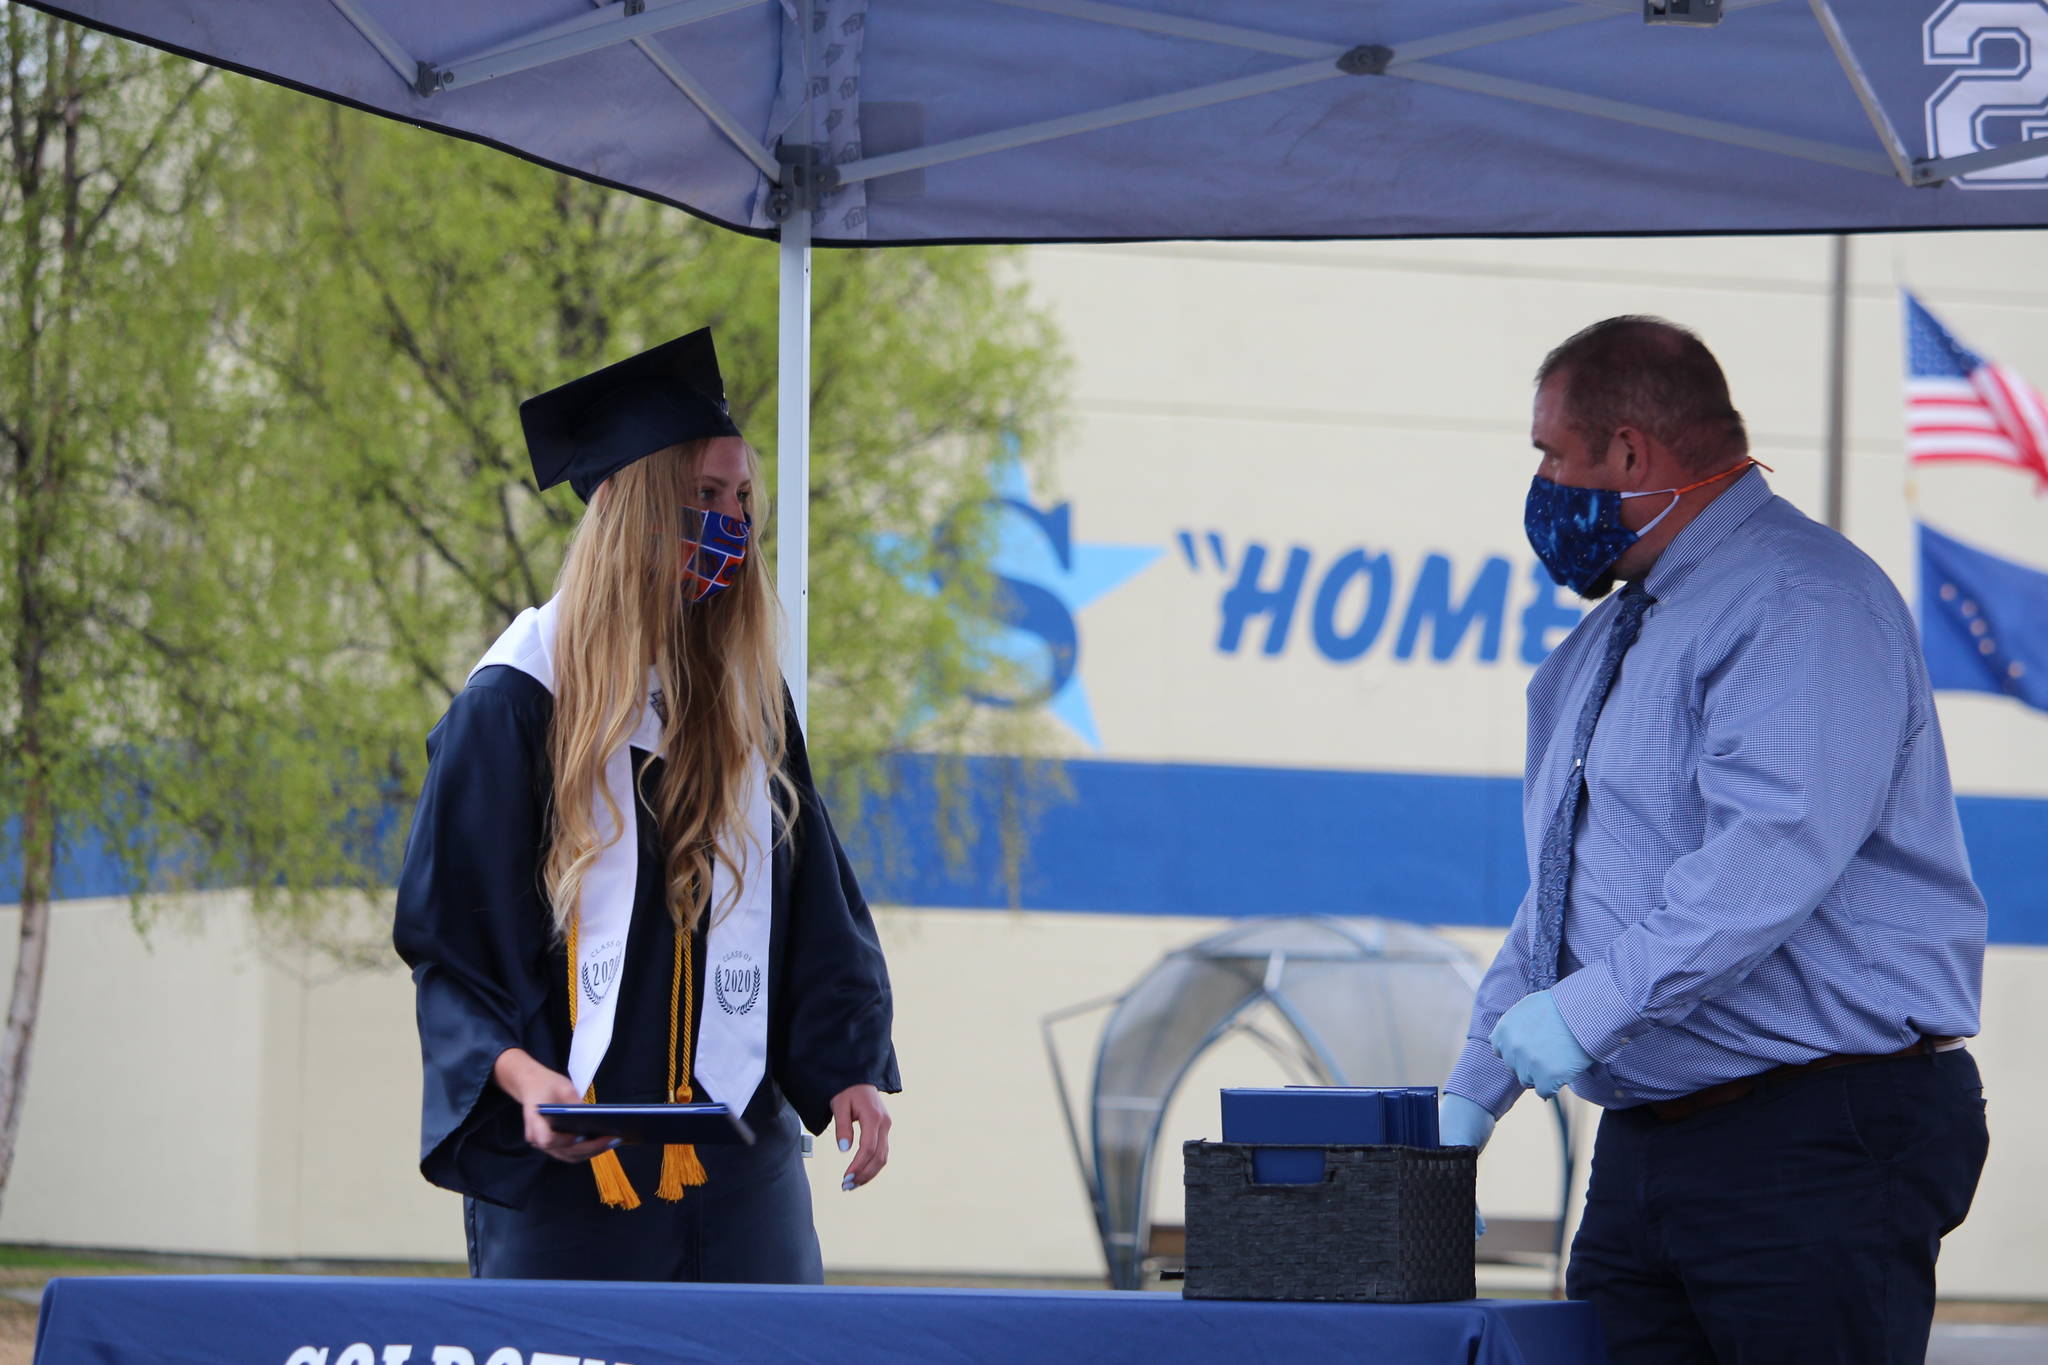 Cameron Blackwell, a graduate and valedictorian of the class of 2020 at Soldotna High School, receives her diploma from principal Tony Graham Soldotna High School in Soldotna, Alaska on May 18, 2020. (Photo by Brian Mazurek/Peninsula Clarion)